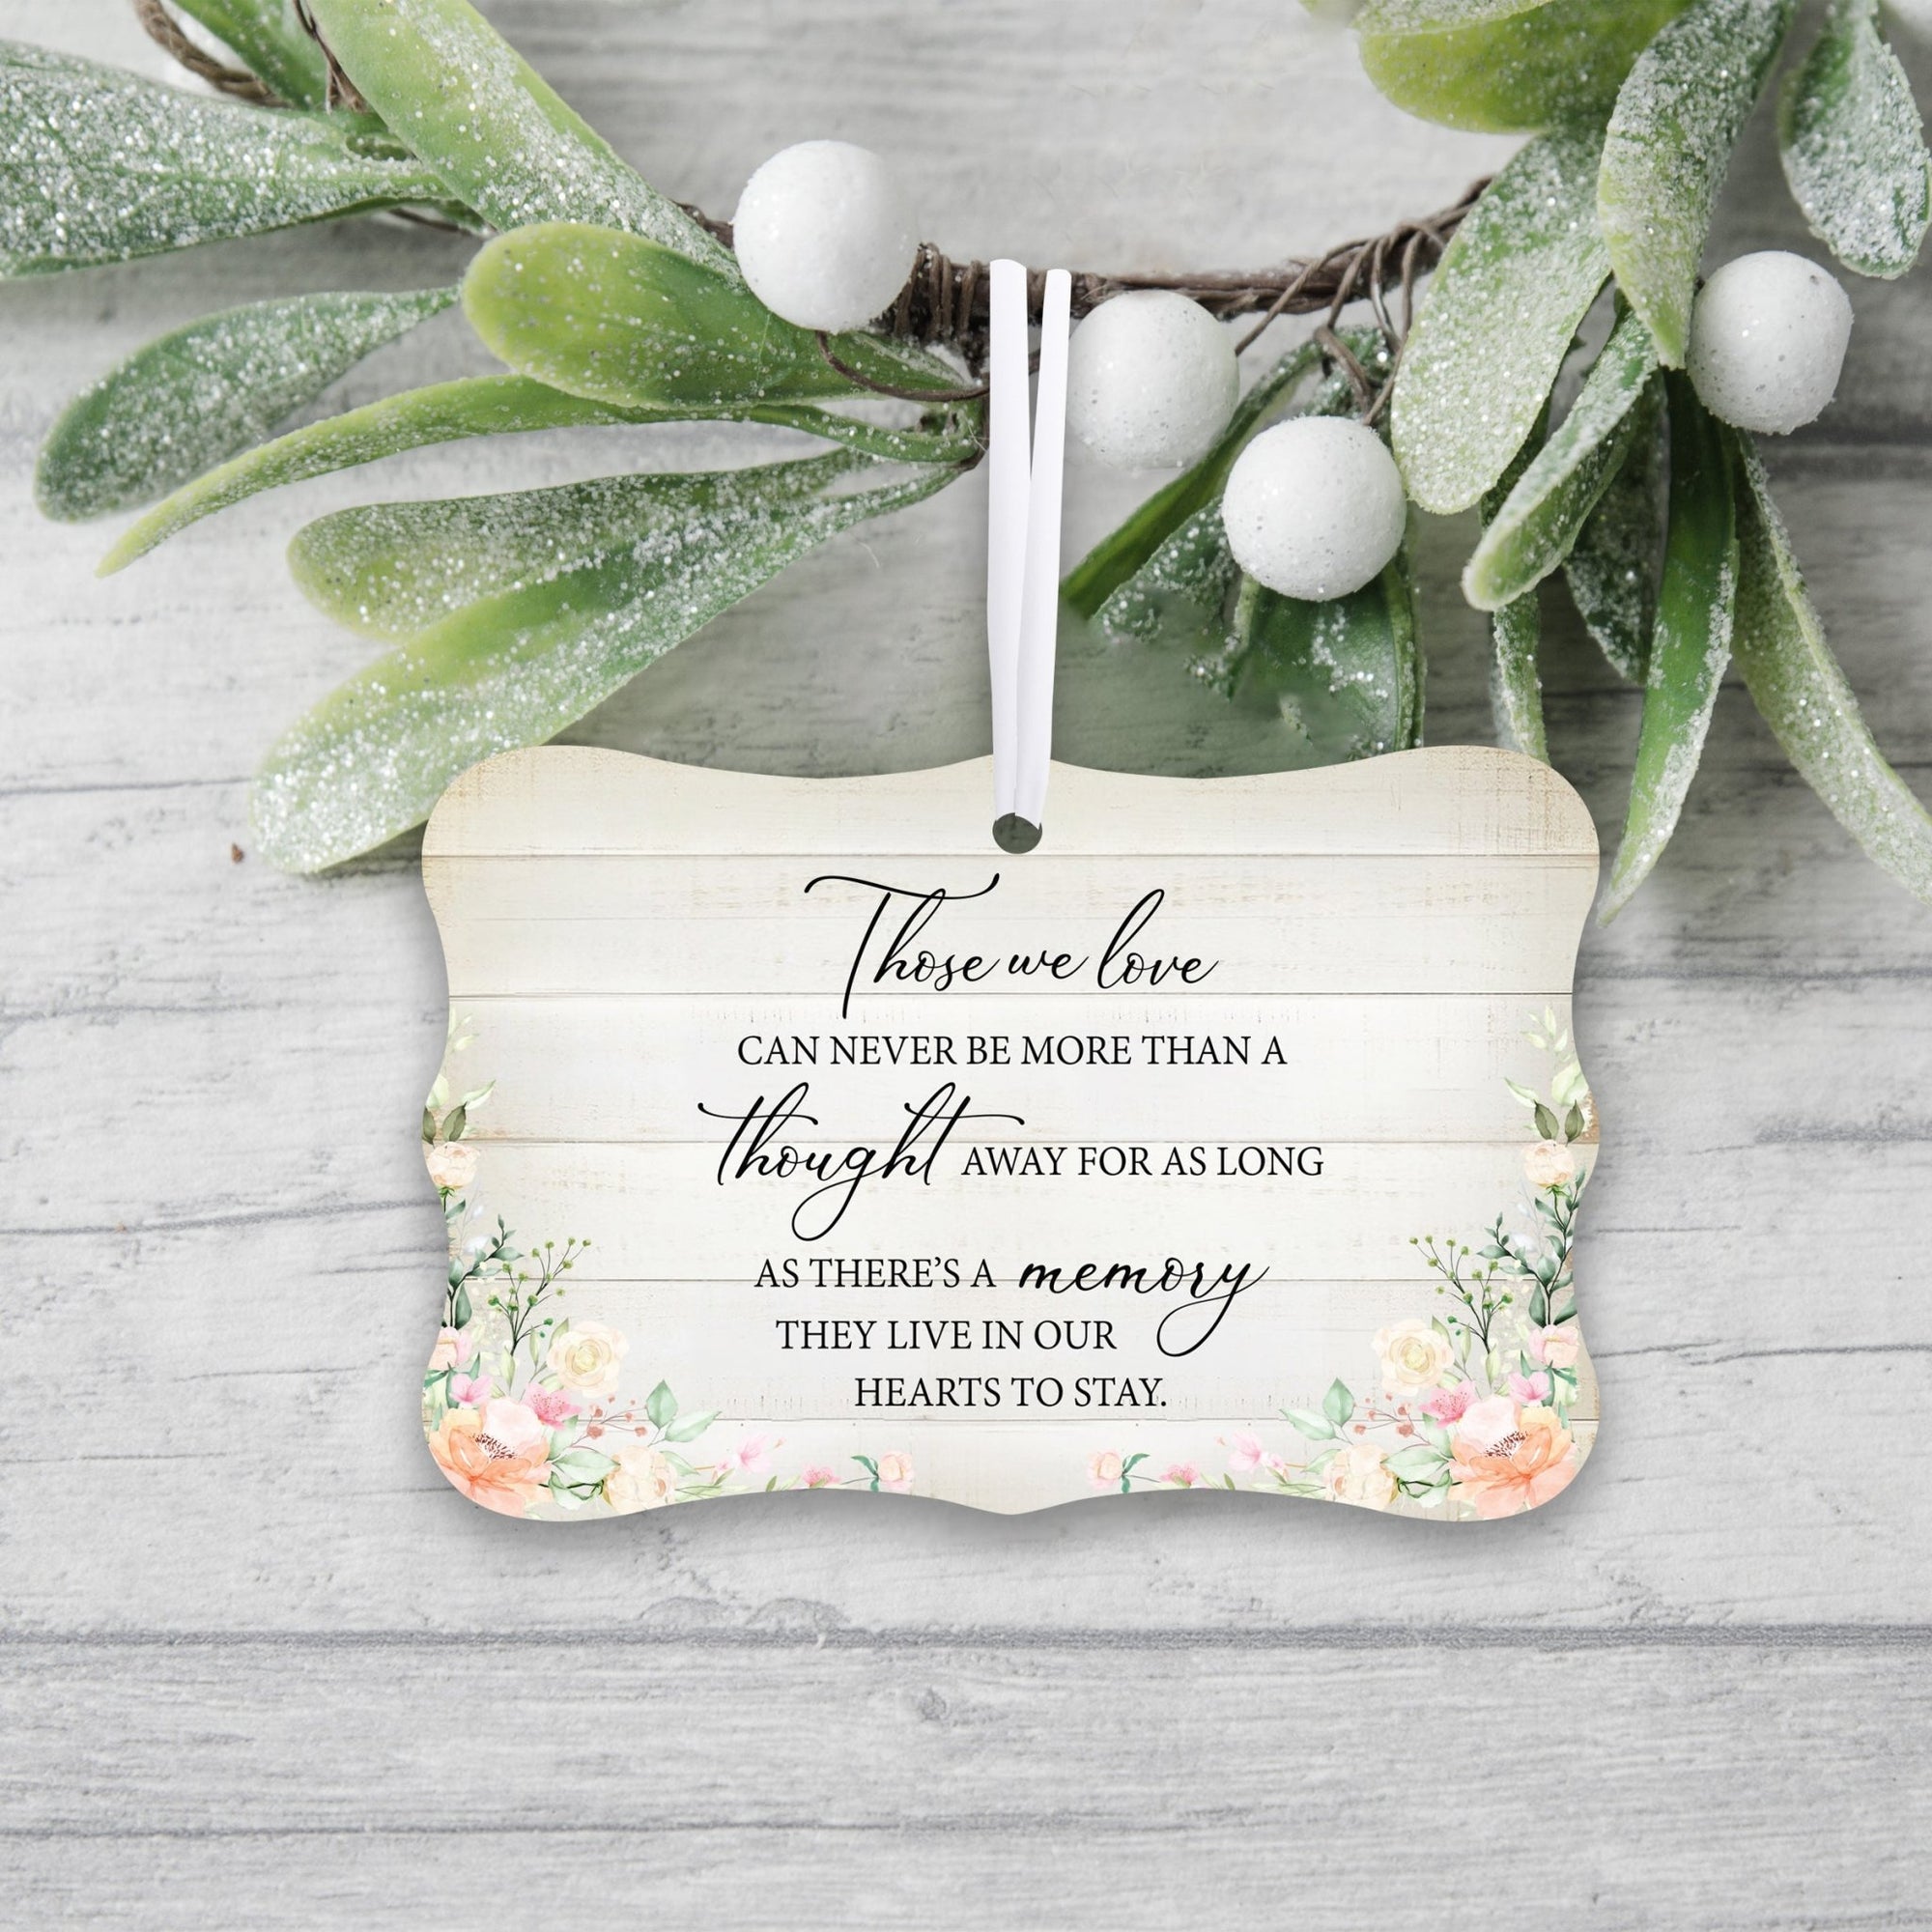 Comforting Memorial Gifts for Loss of Loved One: Lifesong Milestones Ornament.